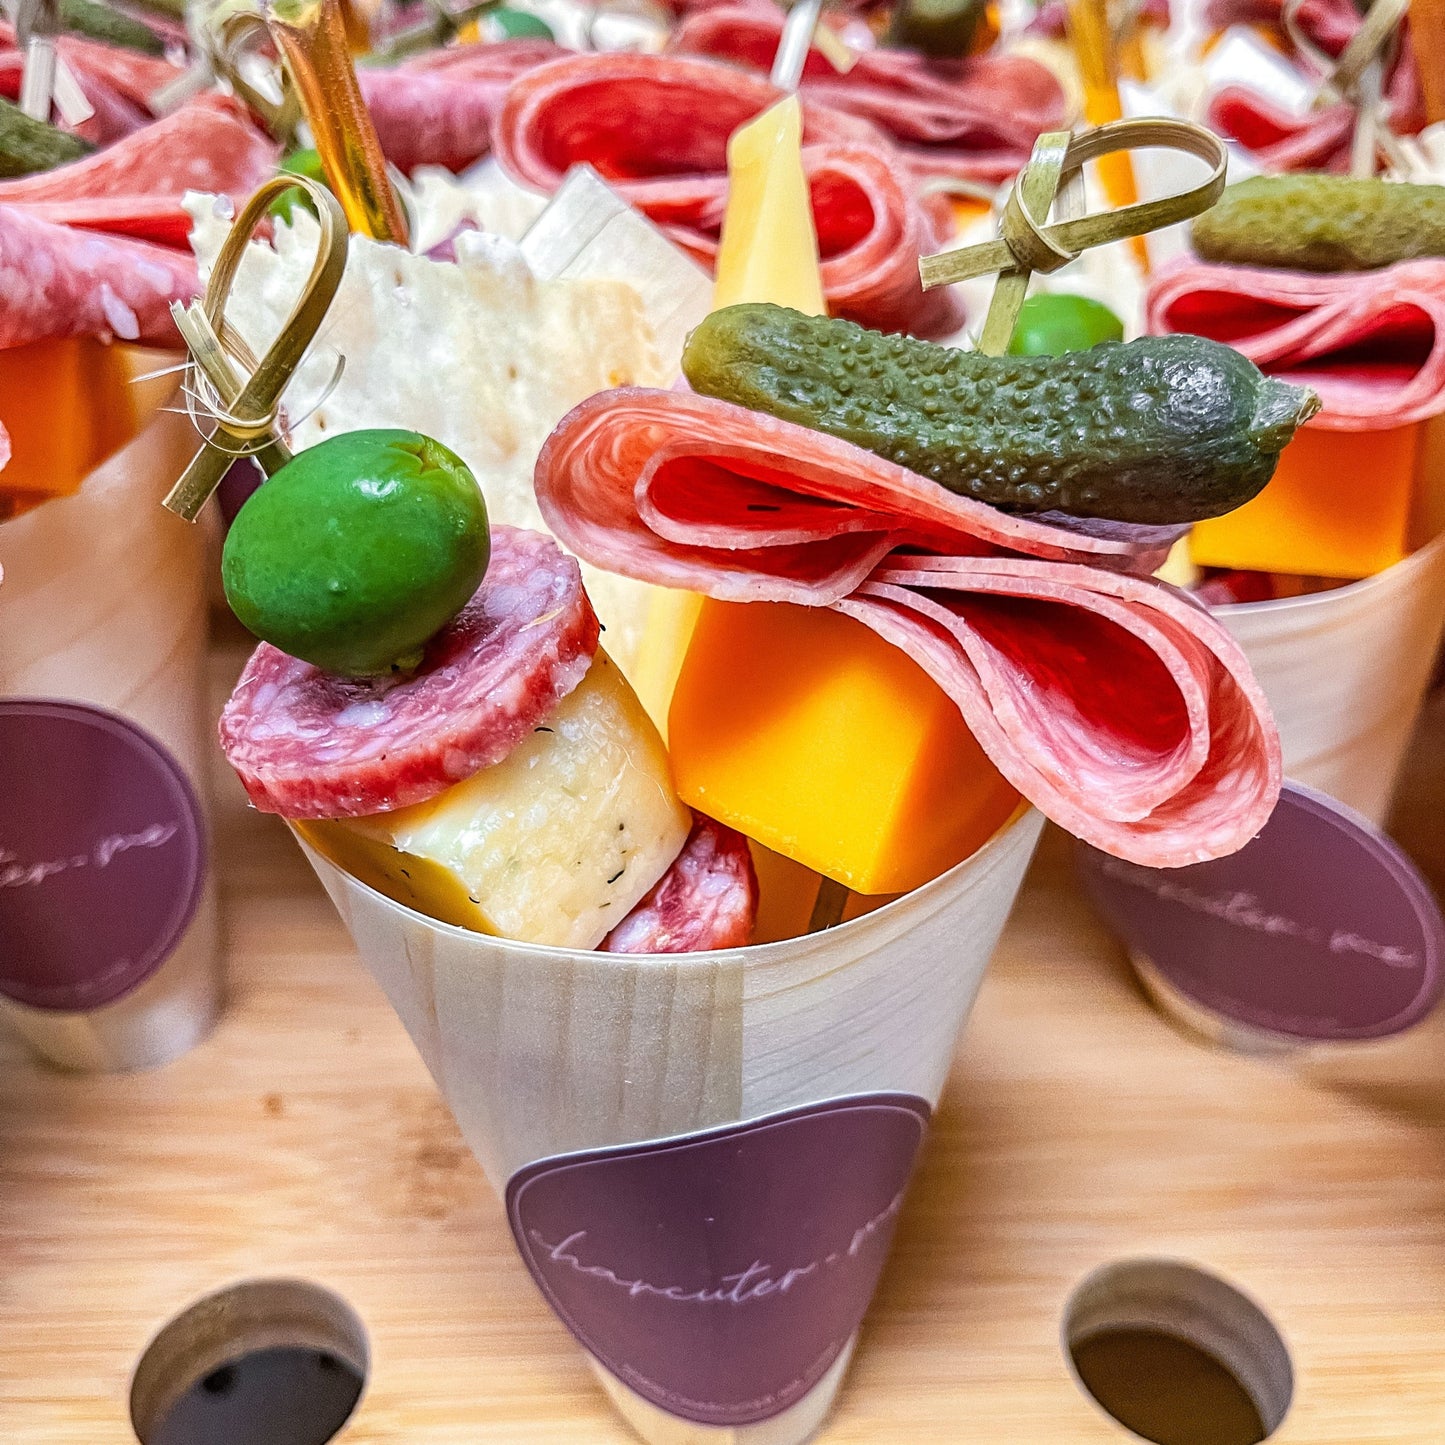 The Charcuterie Cones